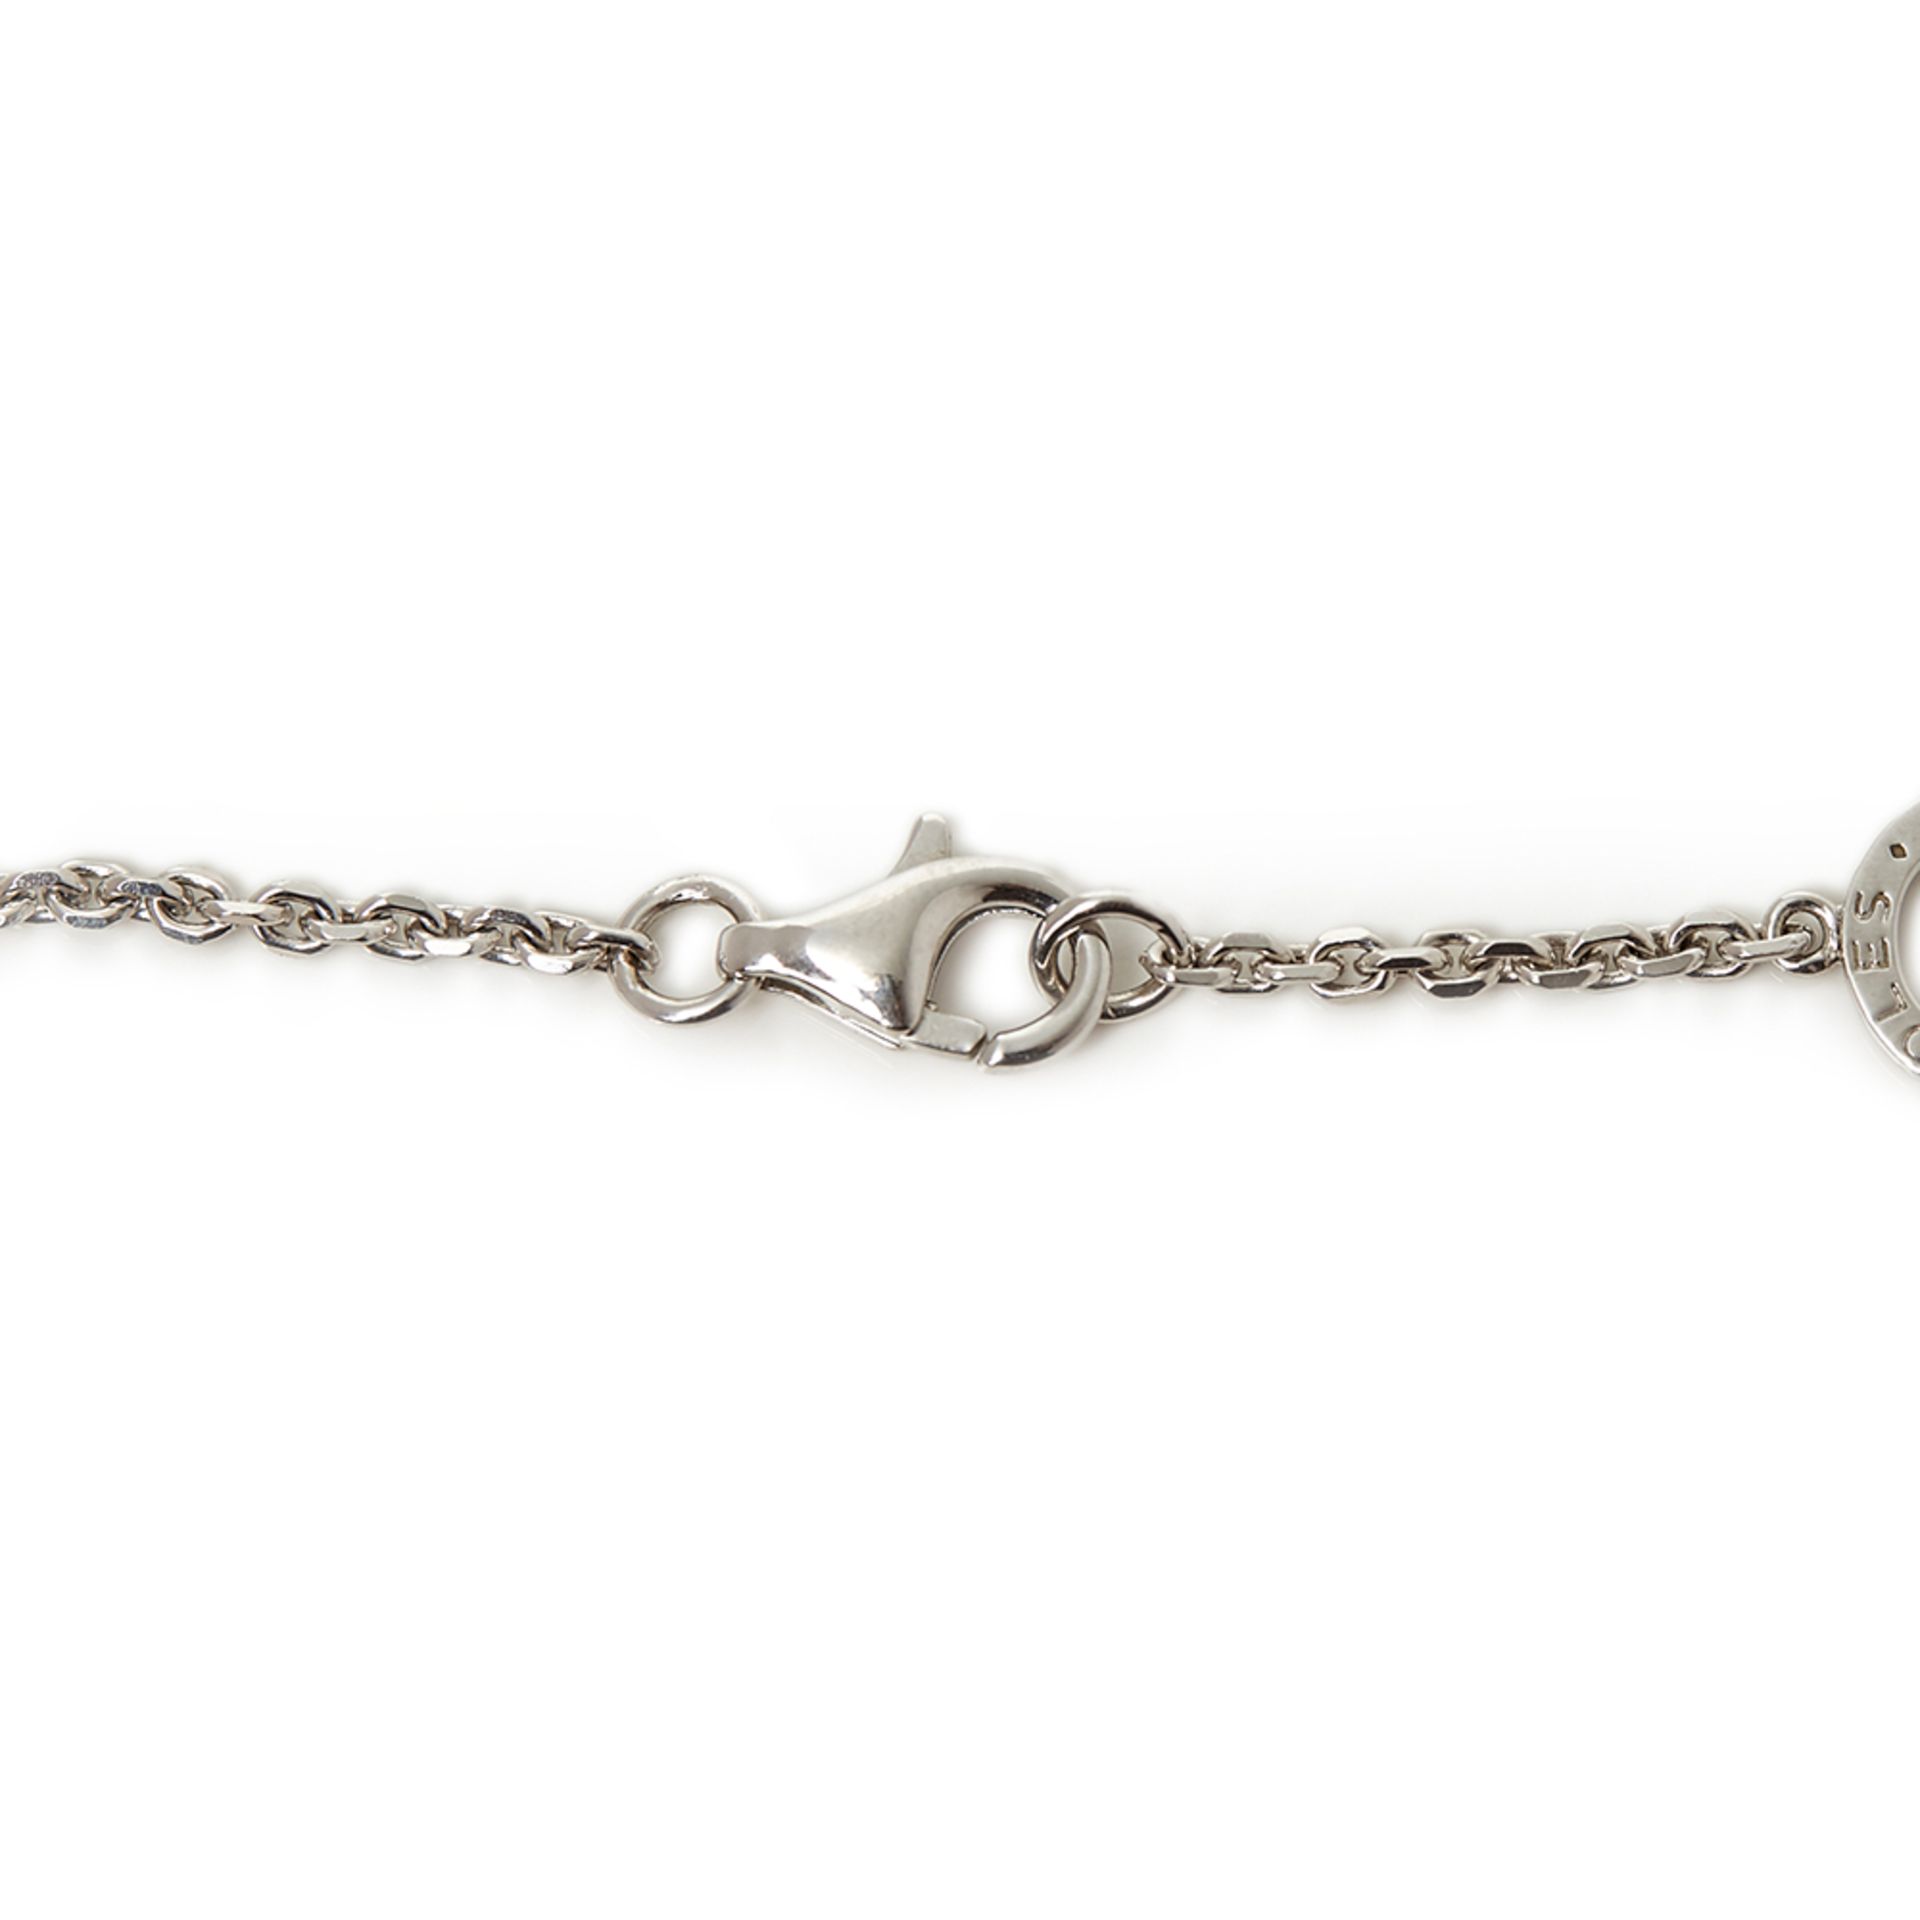 Boodles 18k White Gold Diamond Blossom Necklace - Image 3 of 10